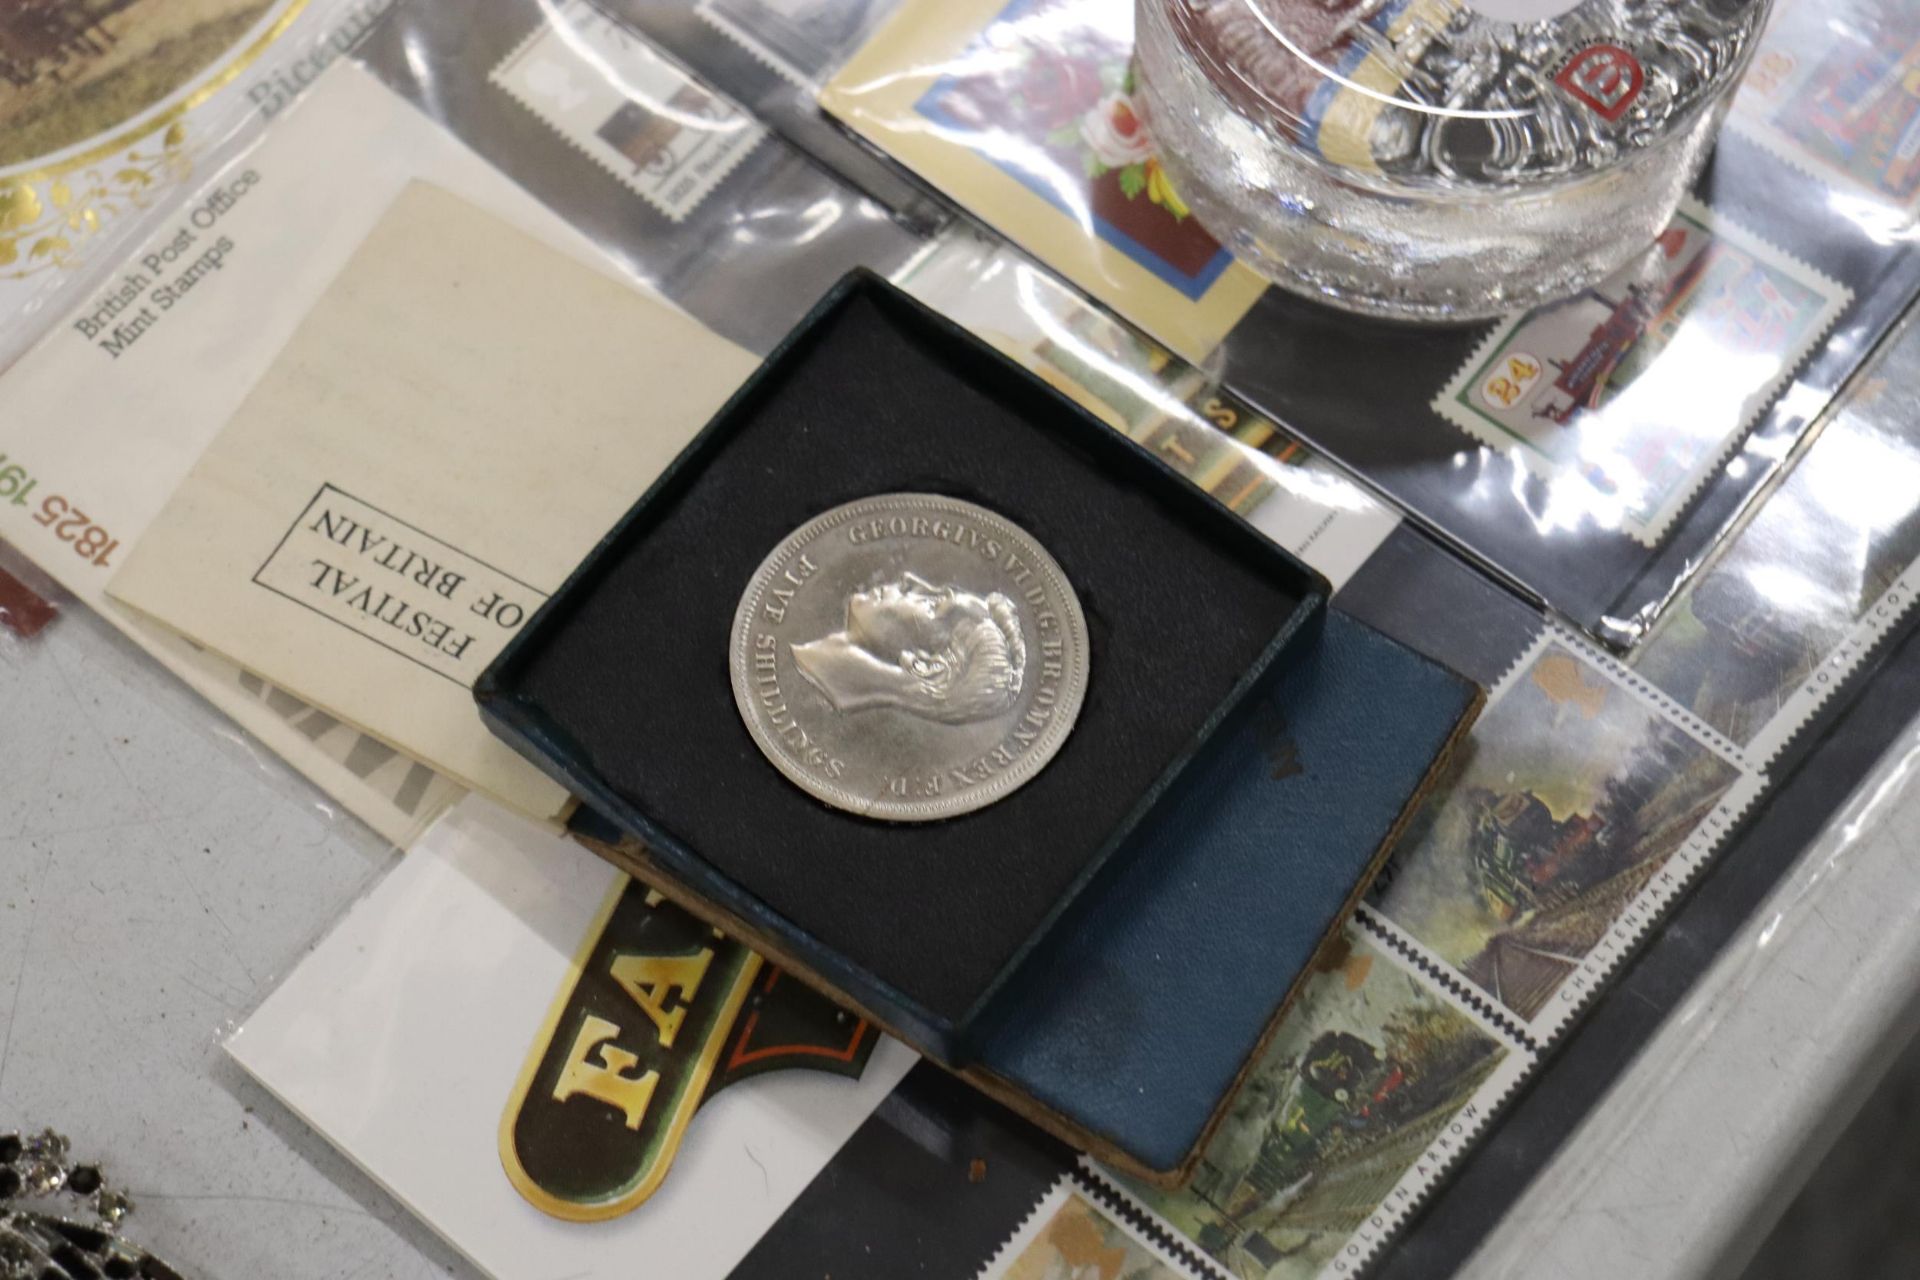 A COLLECTION OF STAMPS, COINS, A PIN AND A PAPERWEIGHT TO INCLUDE 25TH ANNIVERSERY COINS OF QUEEN - Image 2 of 11